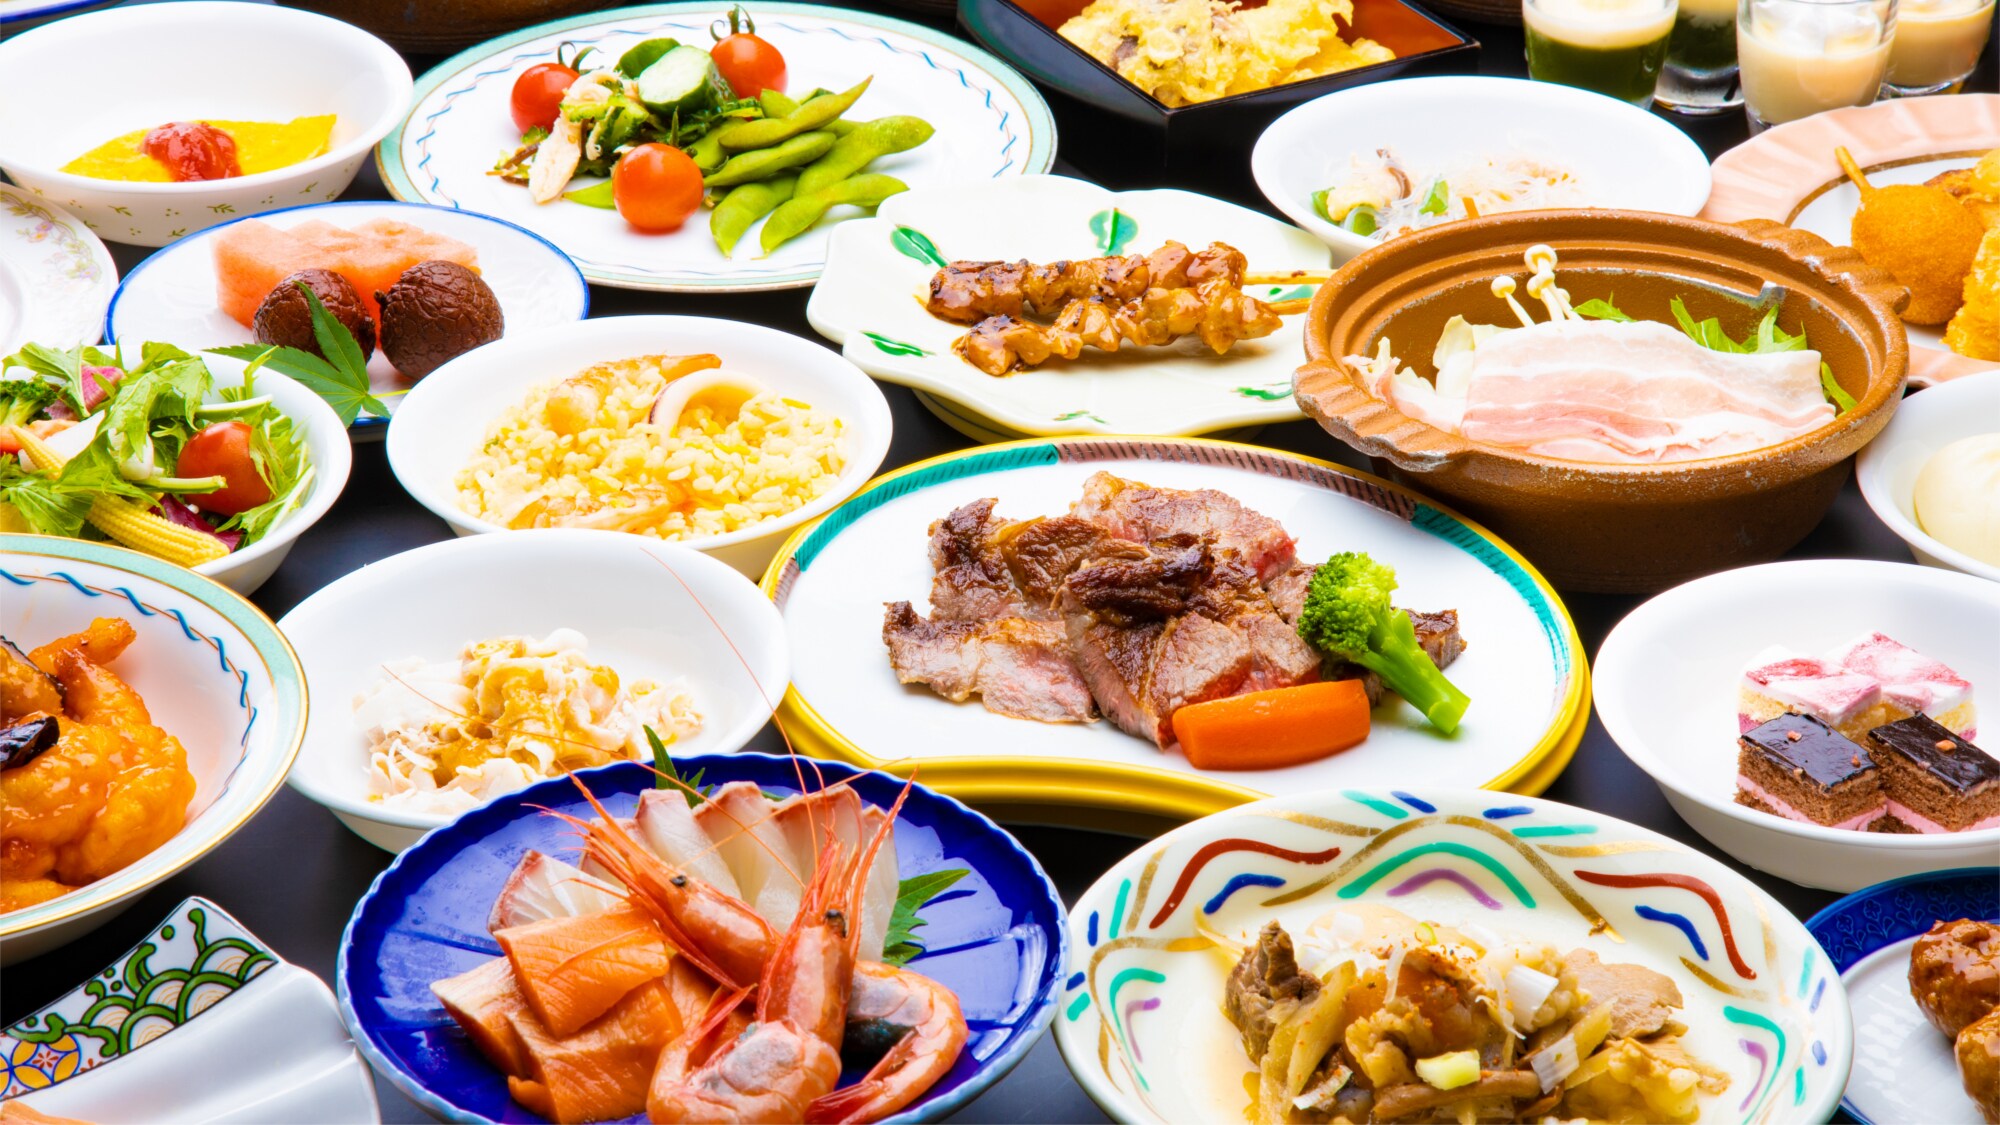 [Dinner buffet] You can enjoy a variety of Japanese, Western, and Chinese dishes (picture is an image)